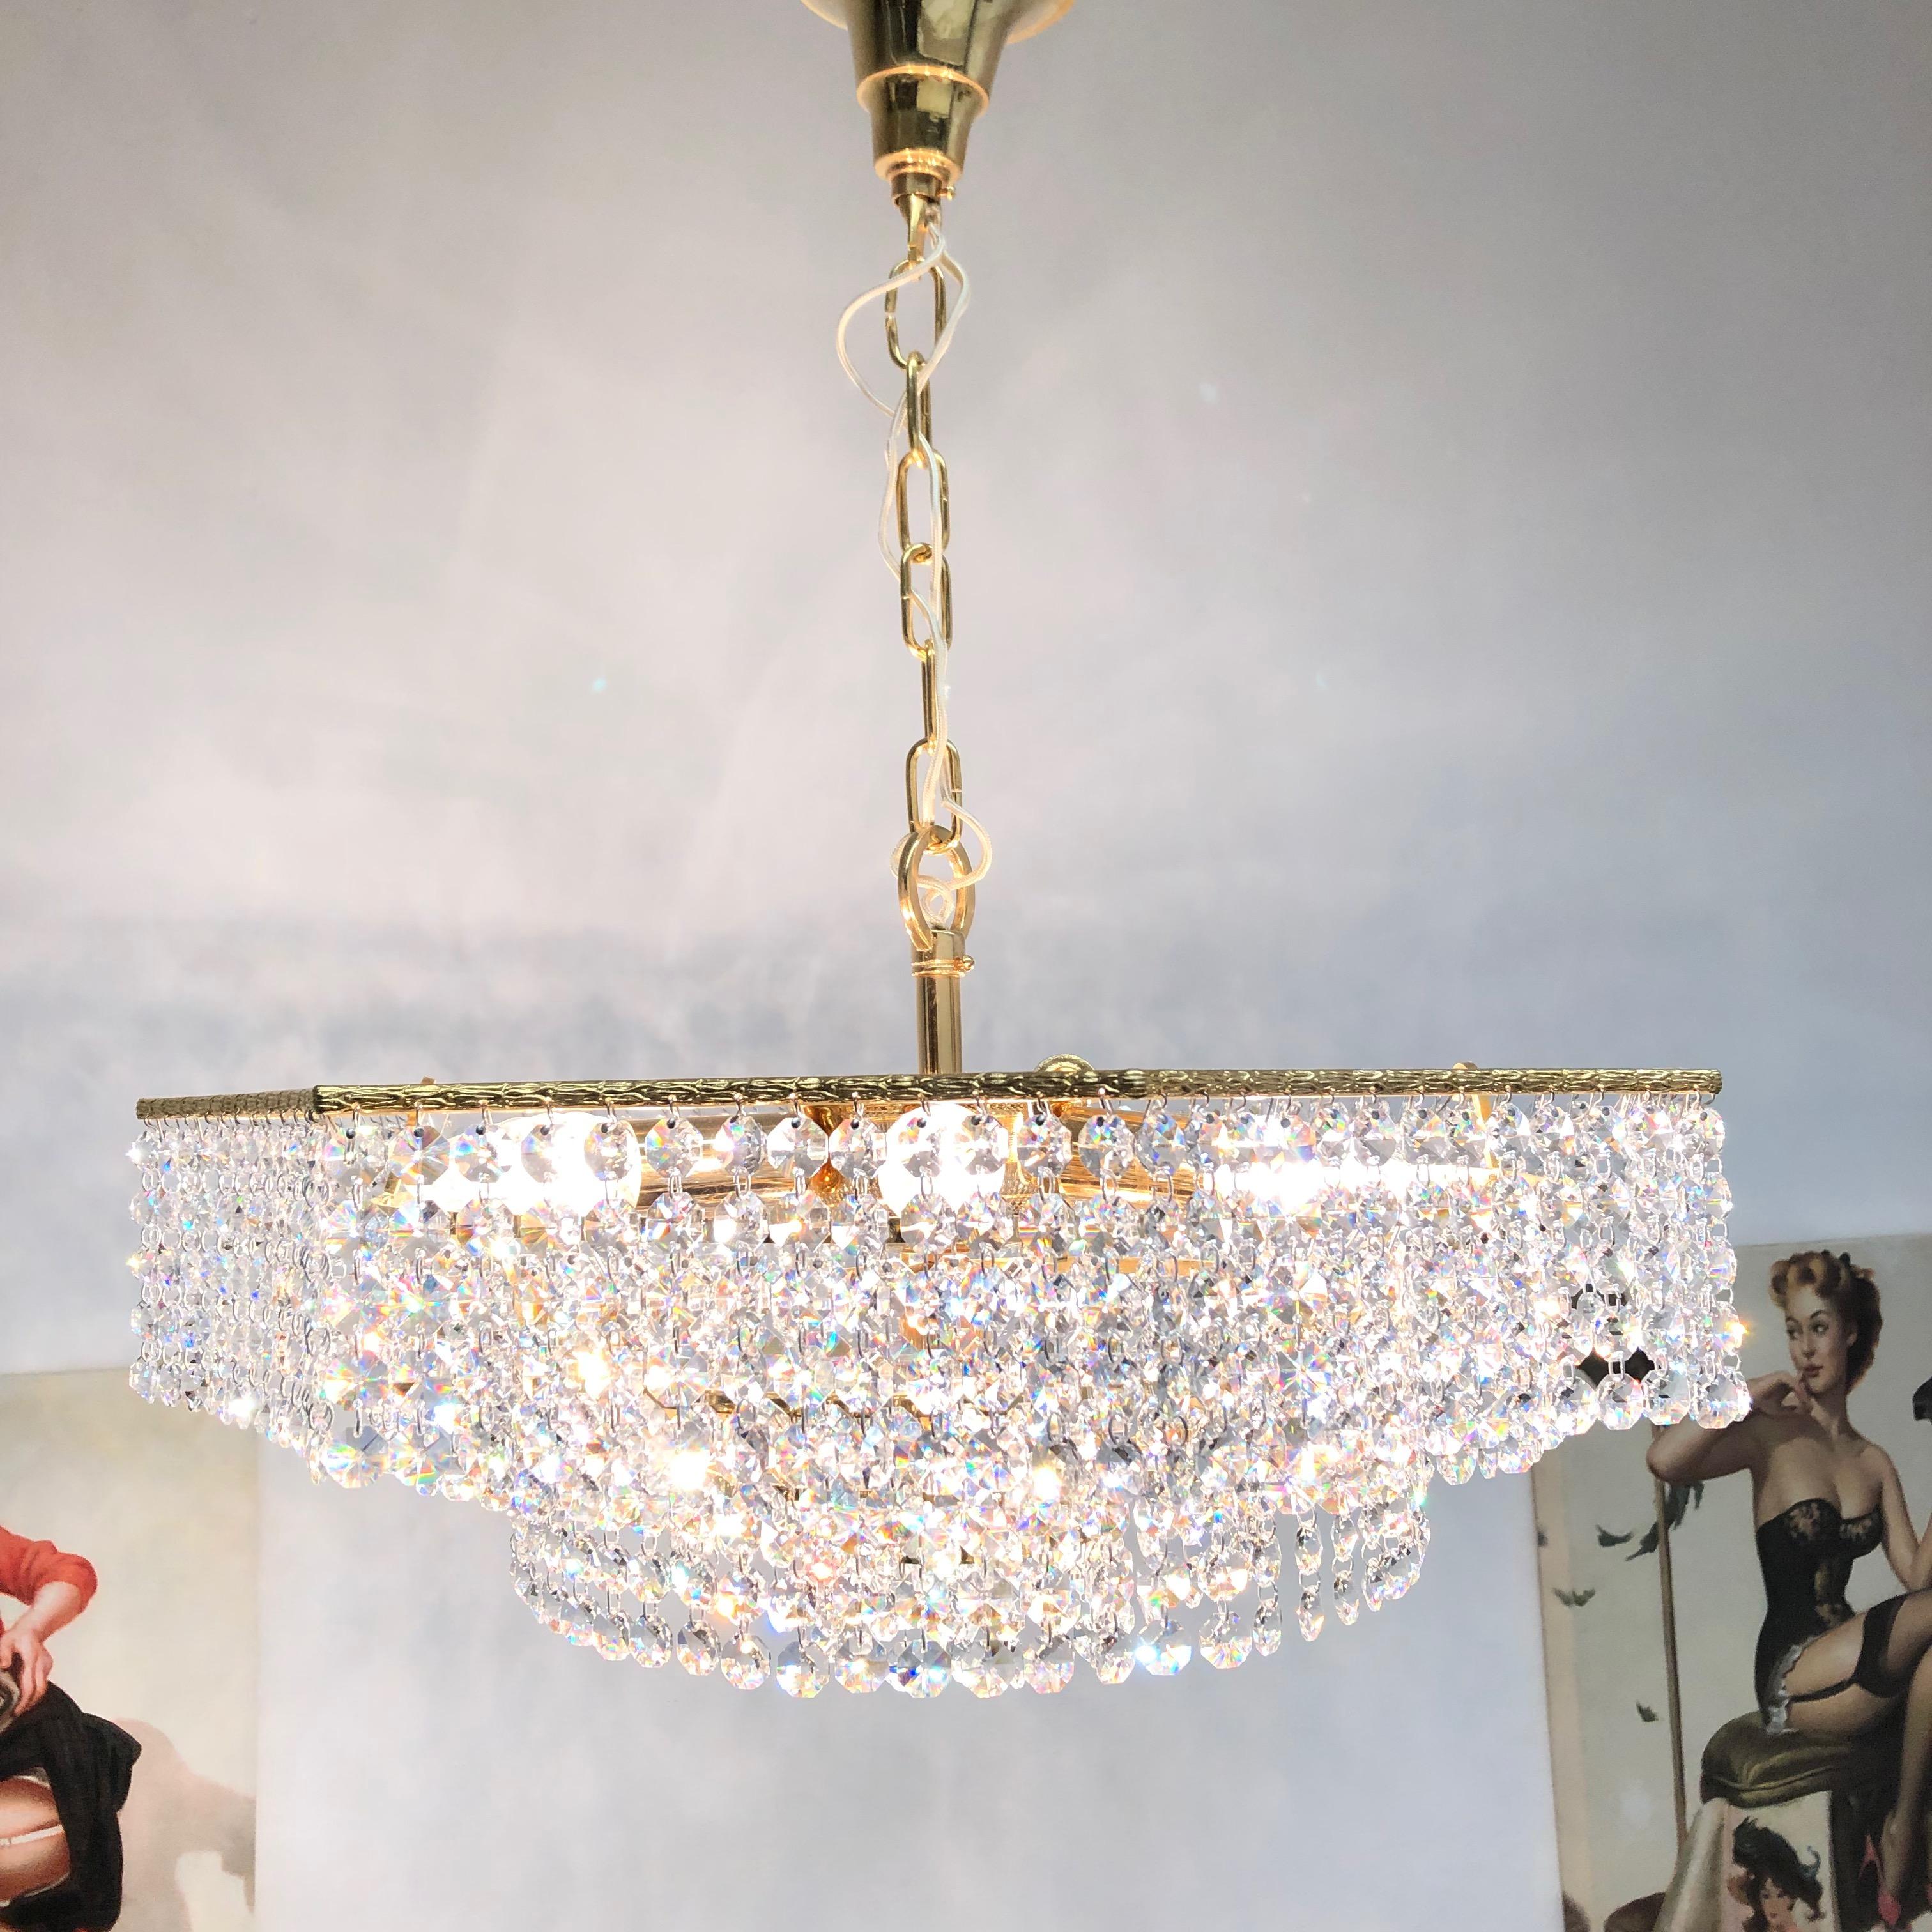 Brass and Crystal Glass Waterfall Chandelier, Richard Essig, Germany, 1960s For Sale 9